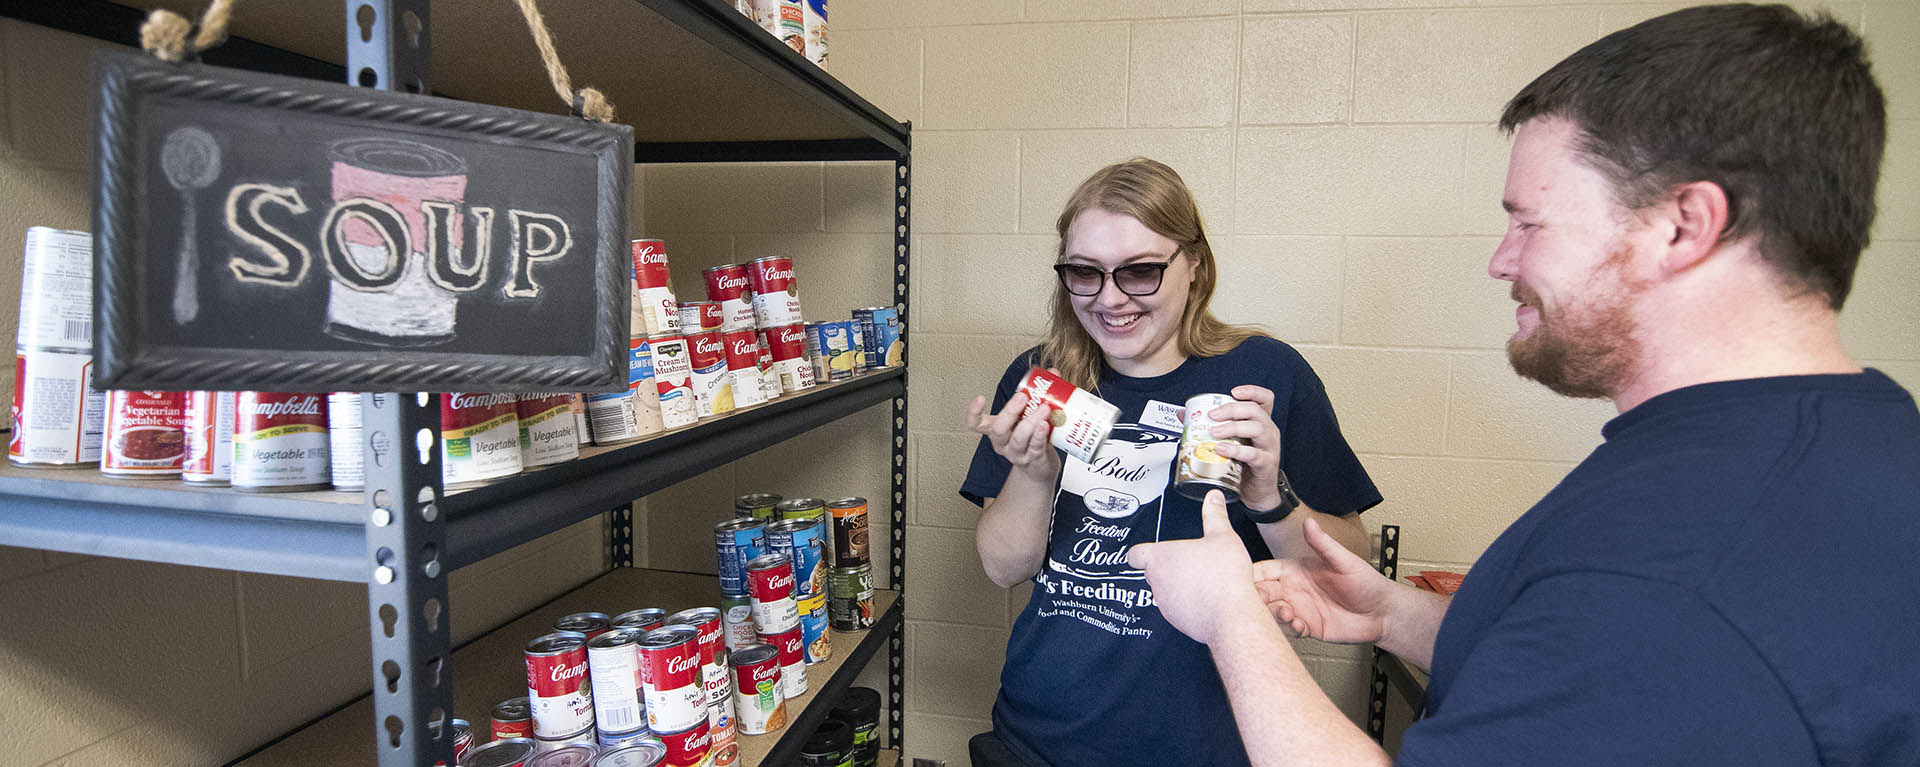 Two students smile while stocking the pantry shelves with cans of soup.